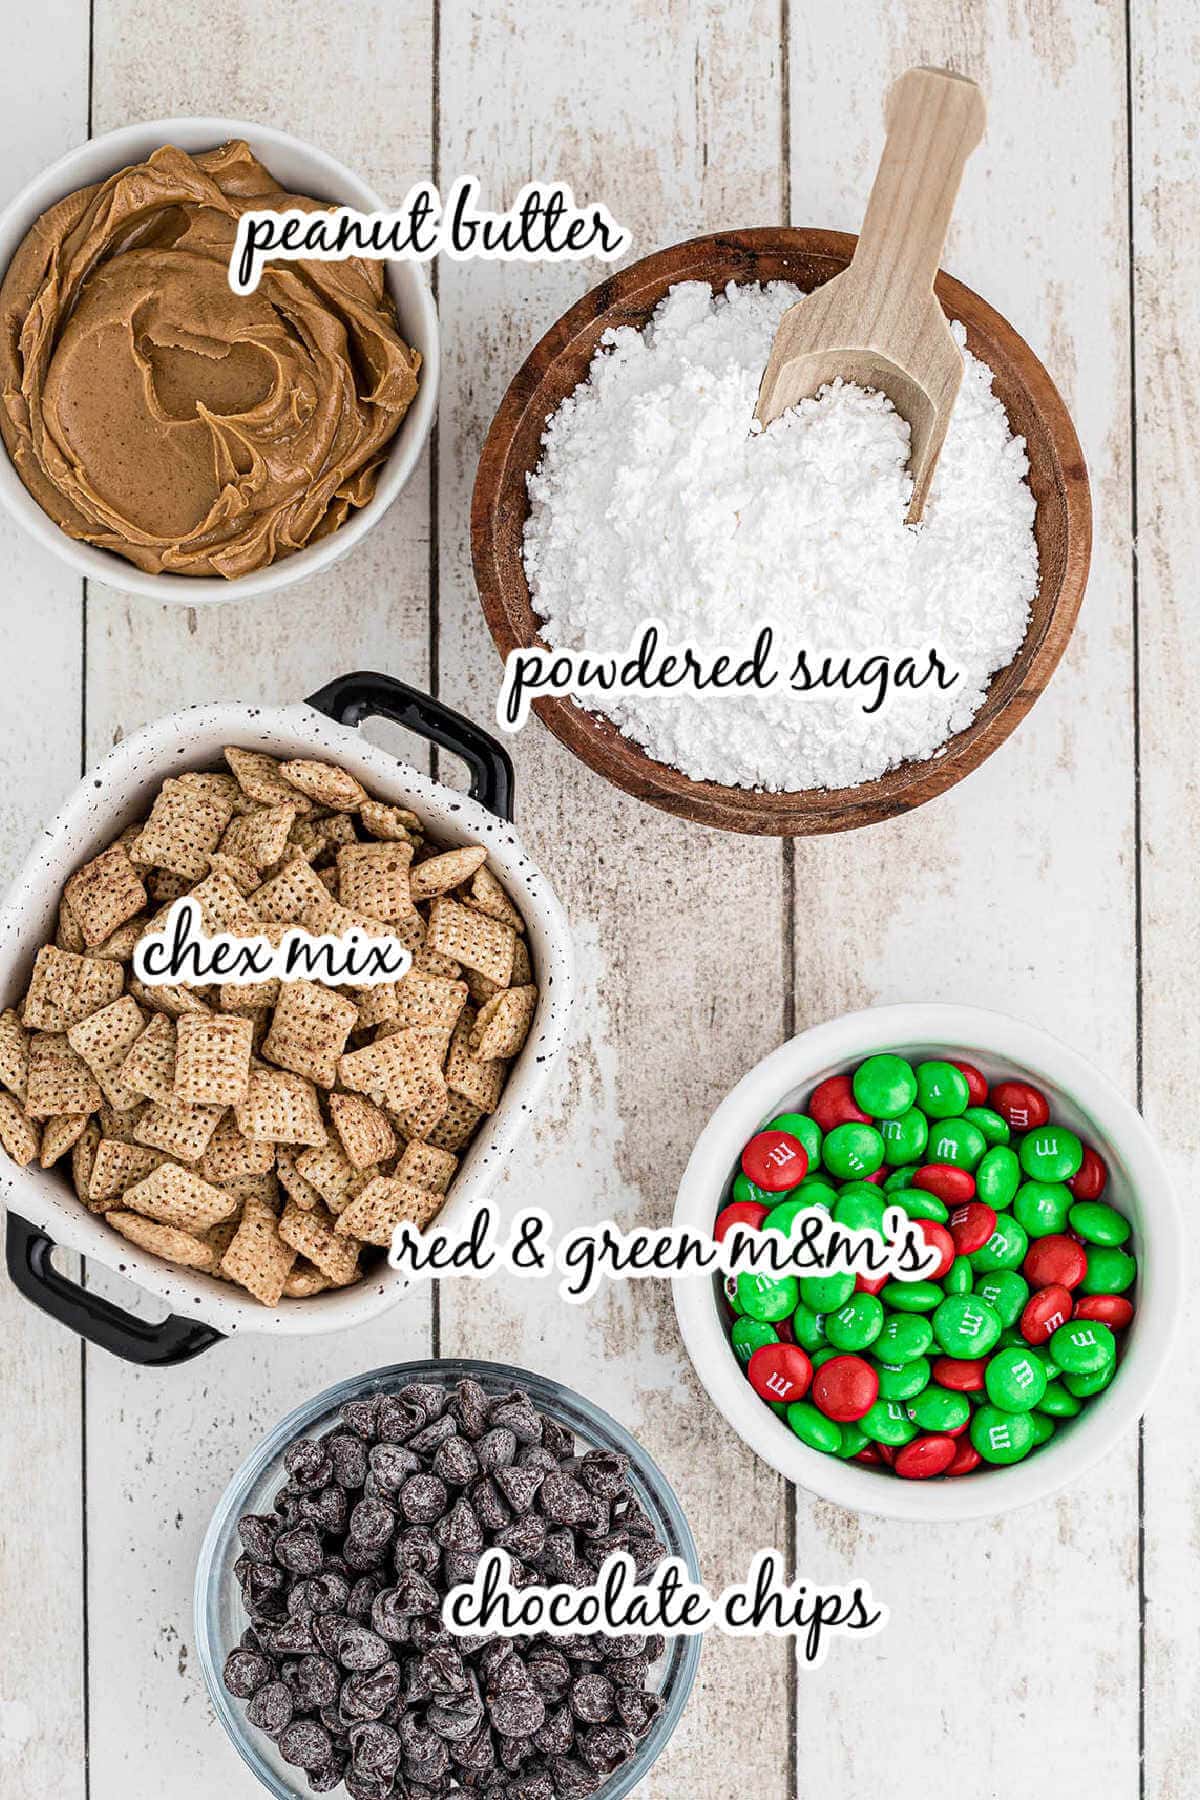 Ingredients to make candy recipe, with print overlay.